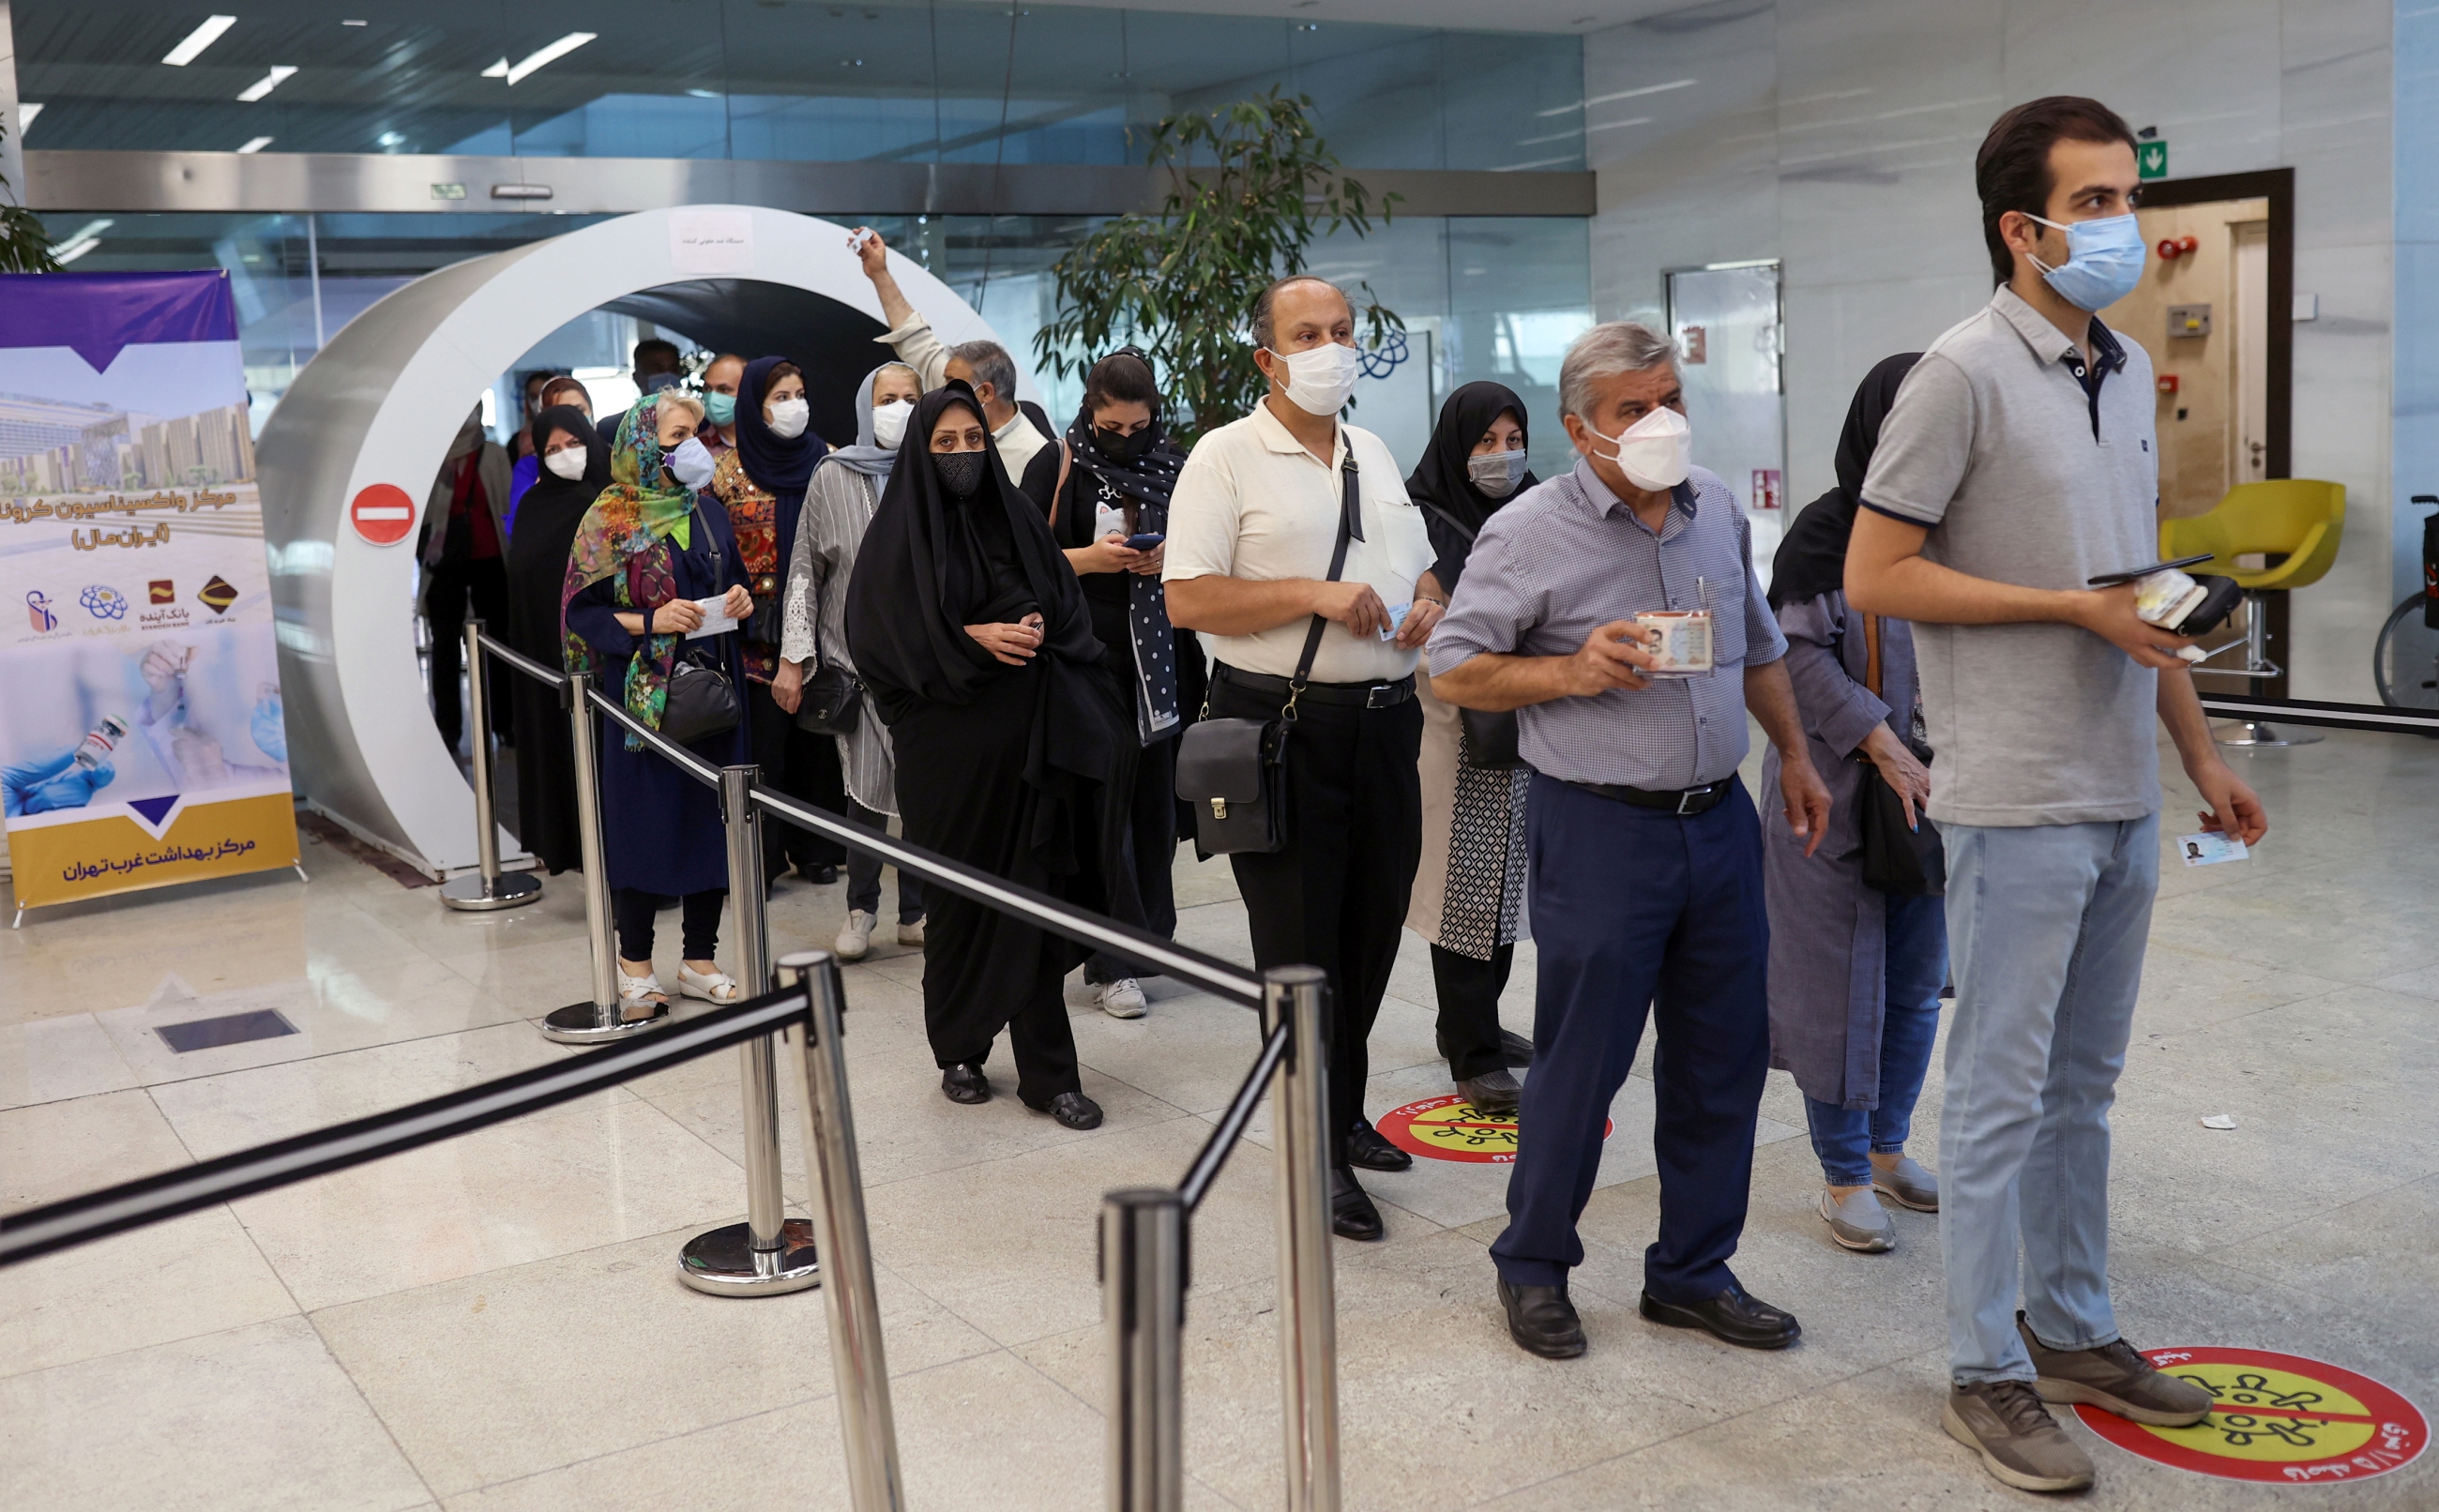 Iranians wait in a queue to receive a vaccine against Covid-19 as cases spike, in a vaccination center in Tehran on 9 August 2021.